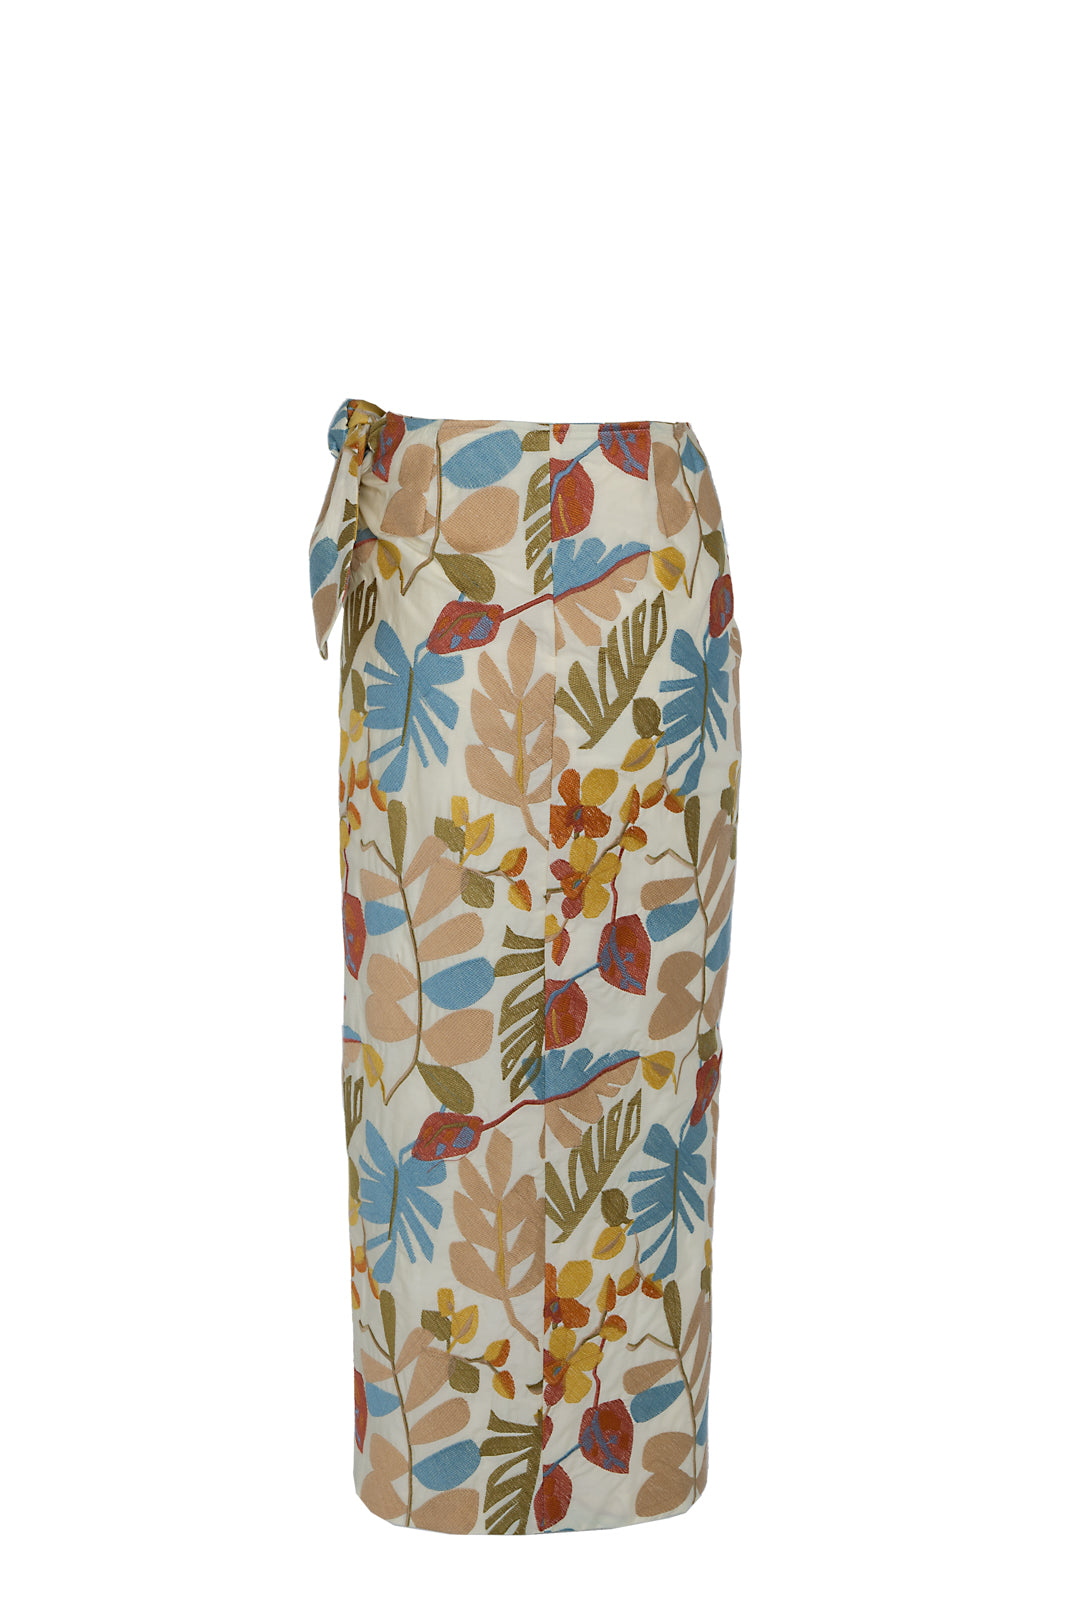 EMBROIDERED TROPICAL FLOWER DAISY SKIRT